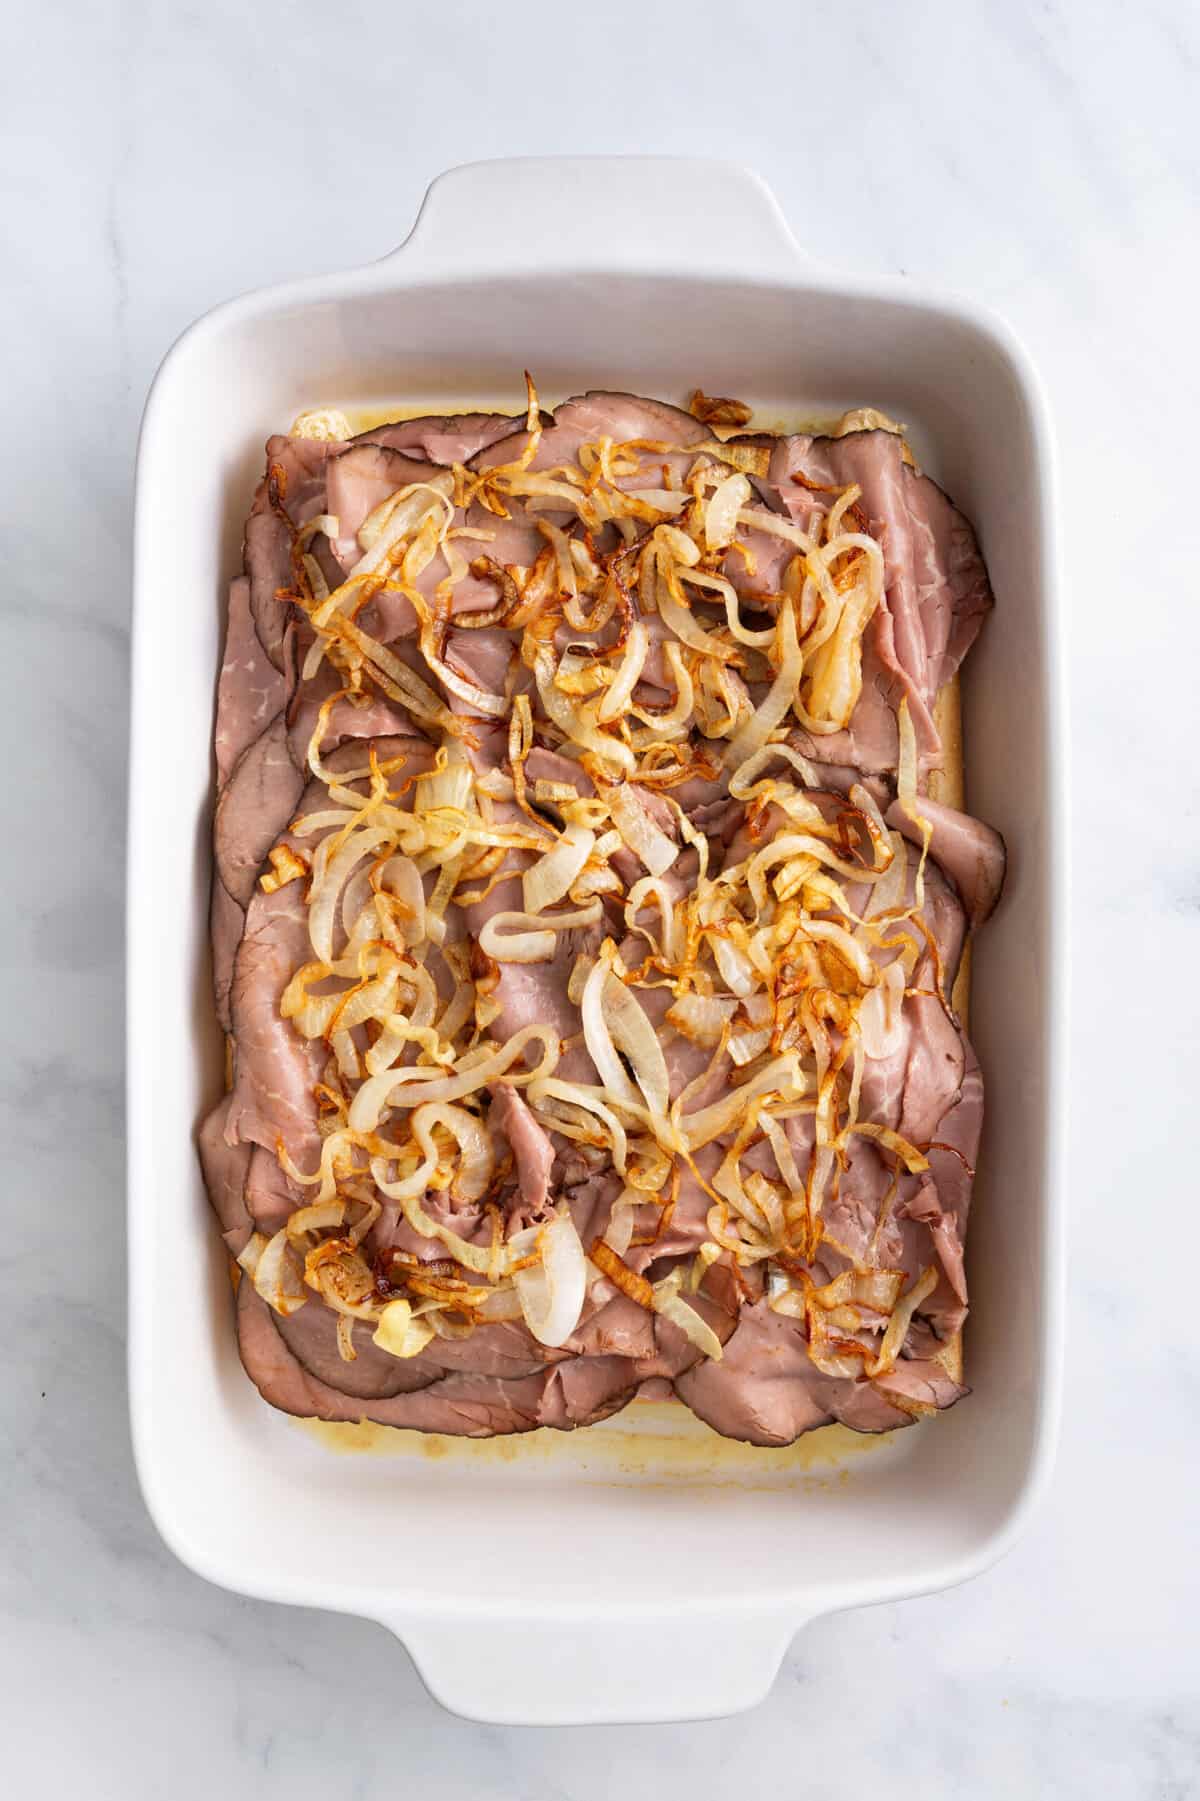 hawaiian roles arranged at the bottom of a 9x13 casserole dish with thinly sliced roast beef arranged on top of the bread evenly and cooked caramelized onions on top